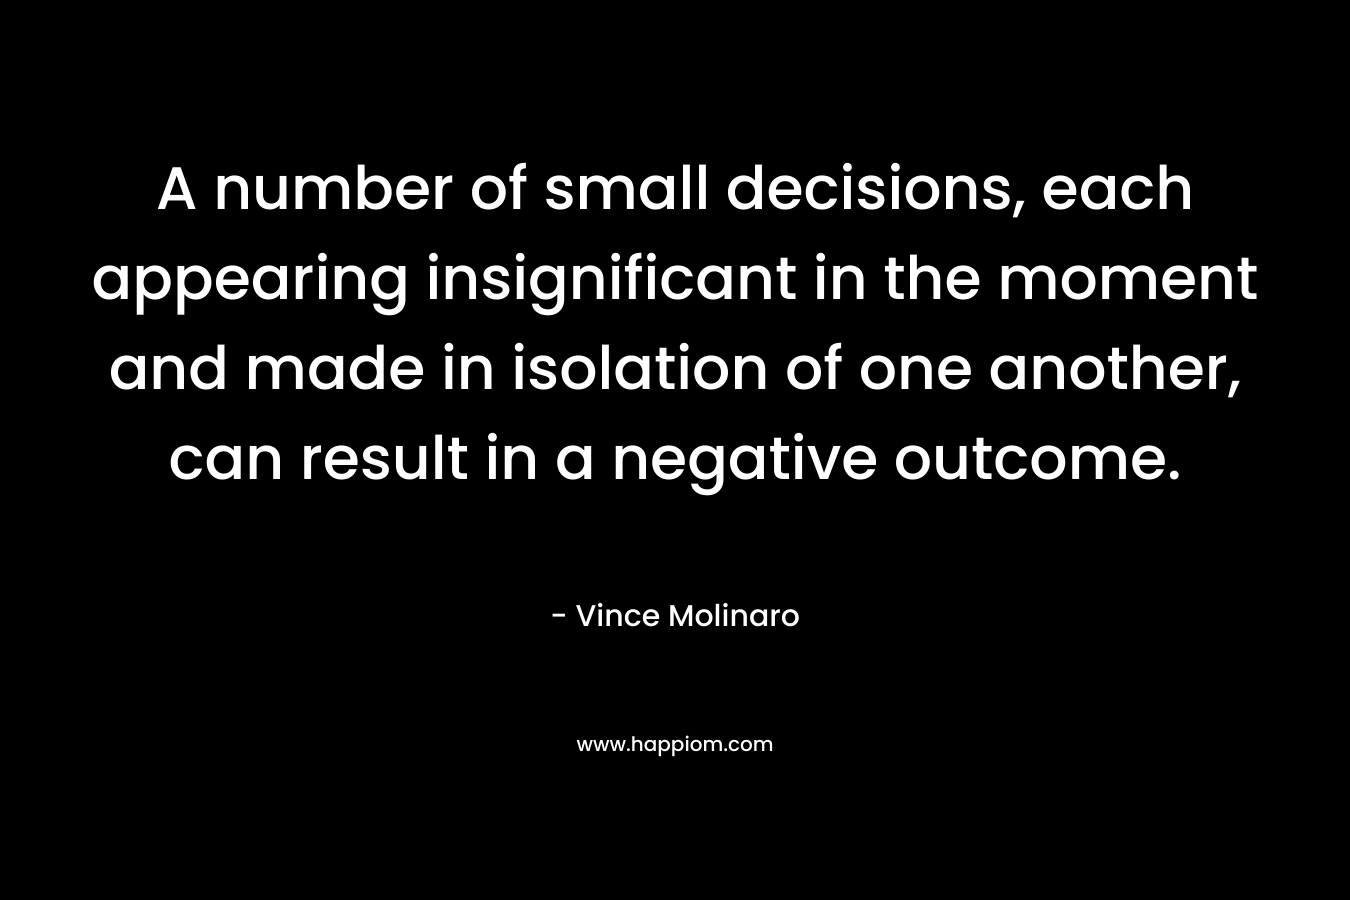 A number of small decisions, each appearing insignificant in the moment and made in isolation of one another, can result in a negative outcome. – Vince Molinaro